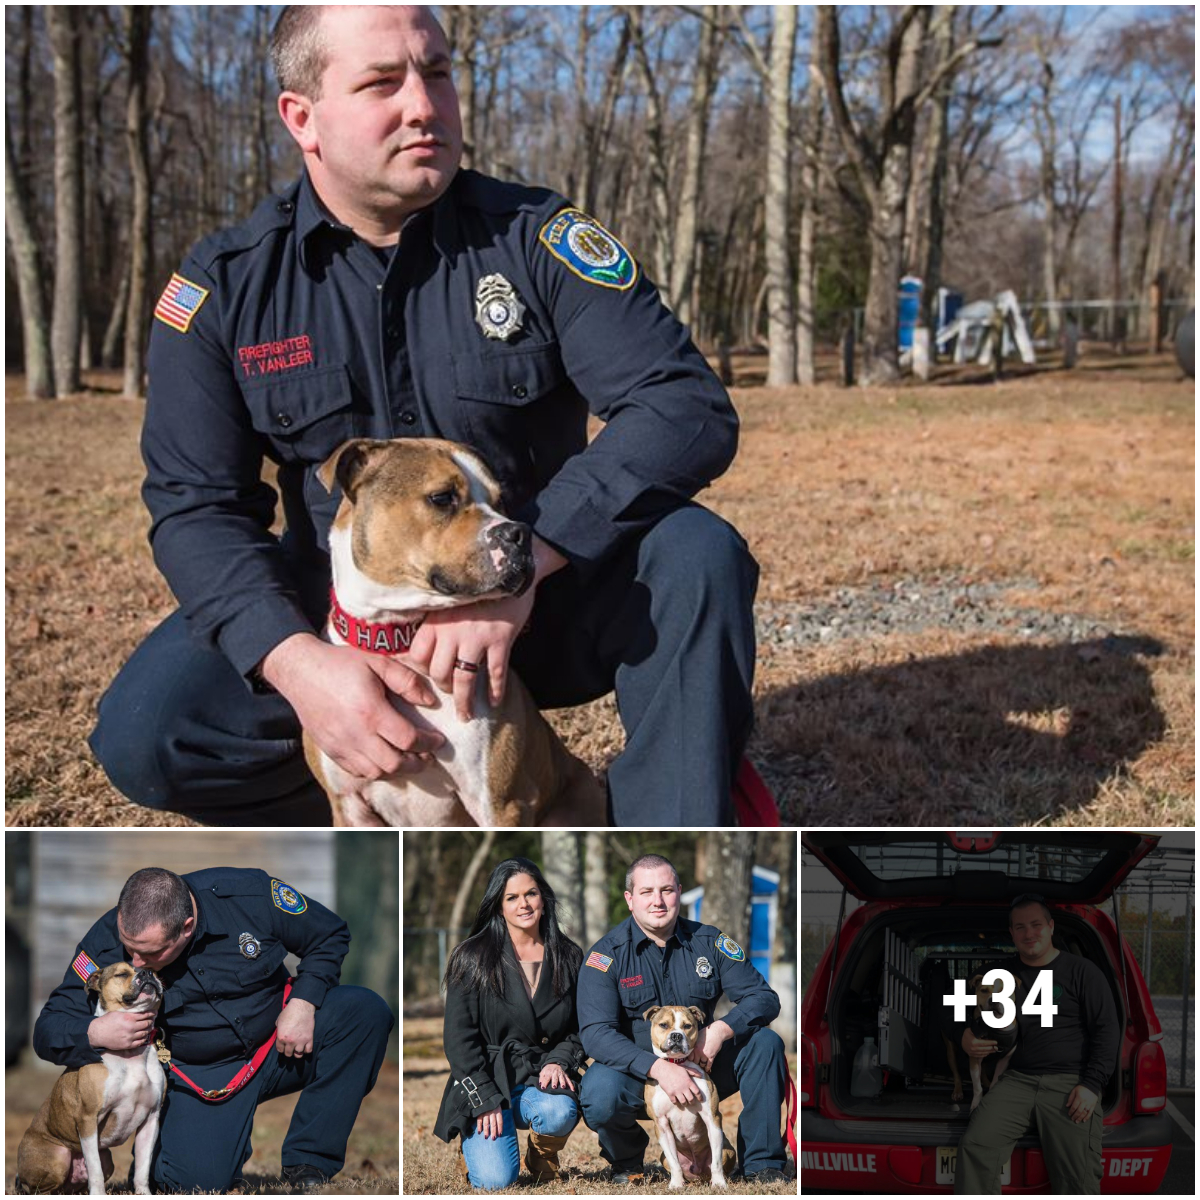 Rescue Dog, who is currently employed by the Millville, New Jersey Fire Department, is the first pit bull to receive a K9 officer certification.